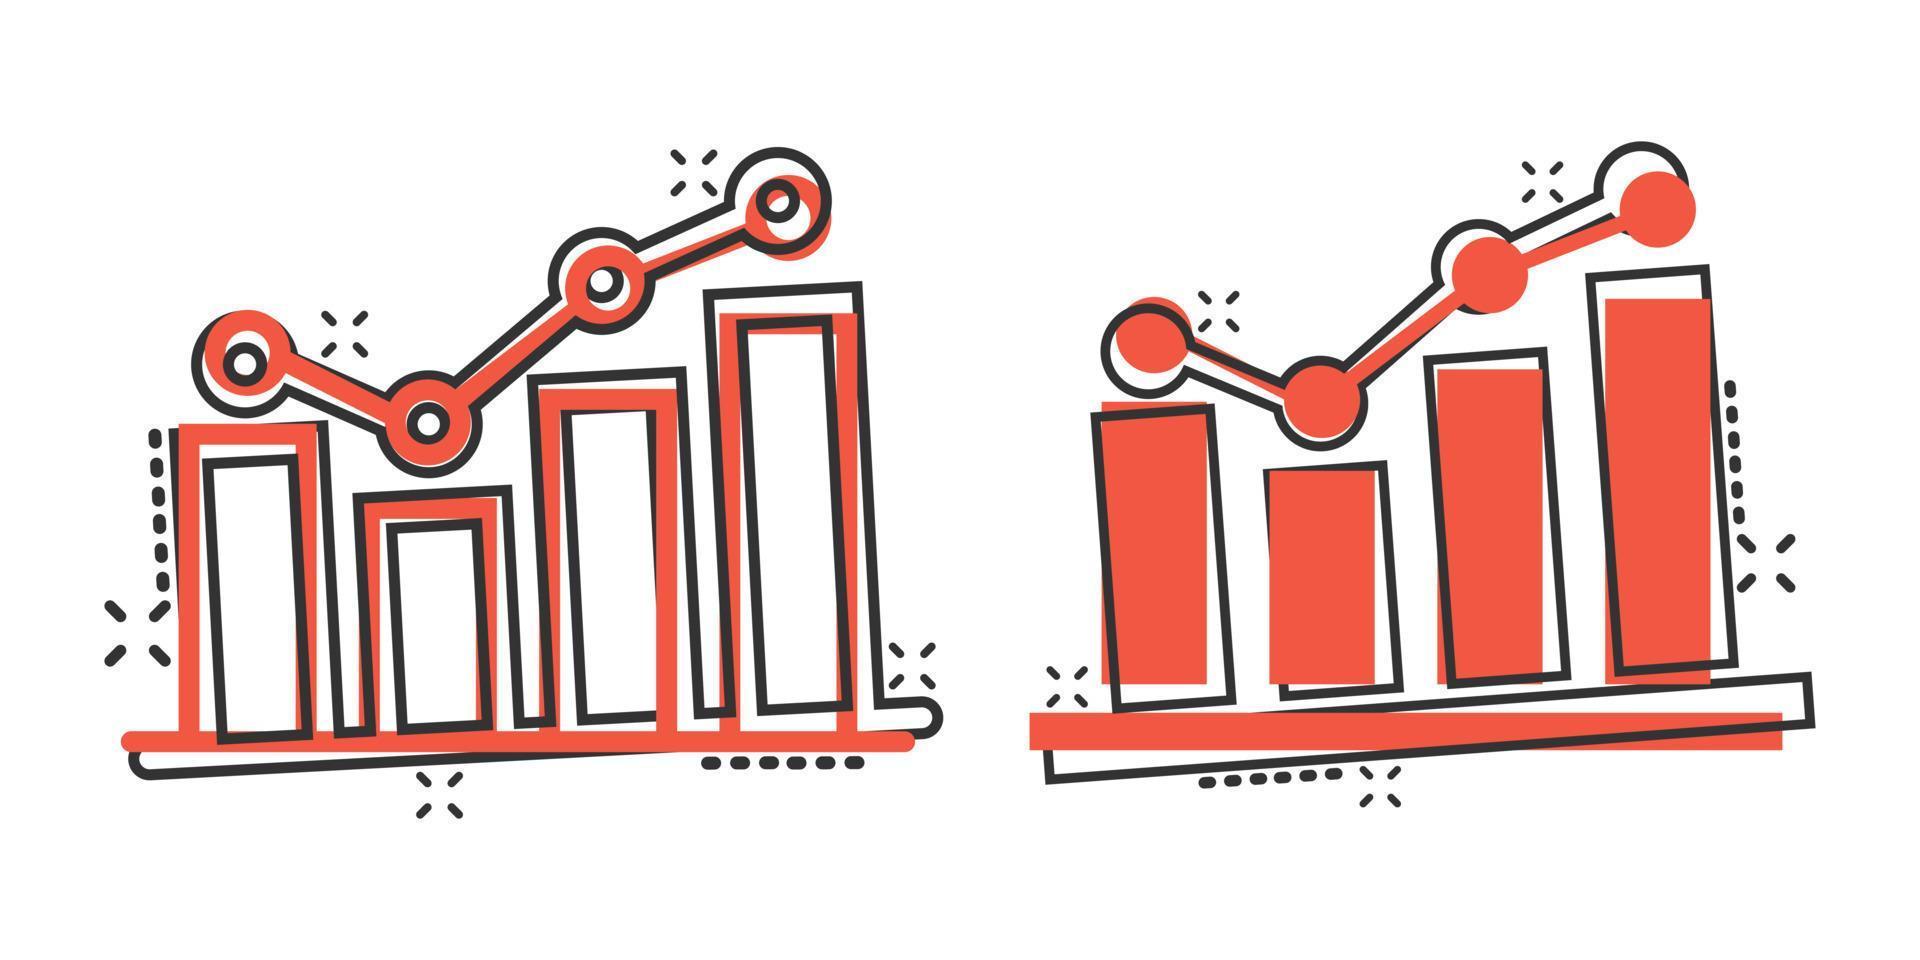 Growing bar graph icon in comic style. Increase arrow cartoon vector illustration on white background. Infographic progress splash effect business concept.